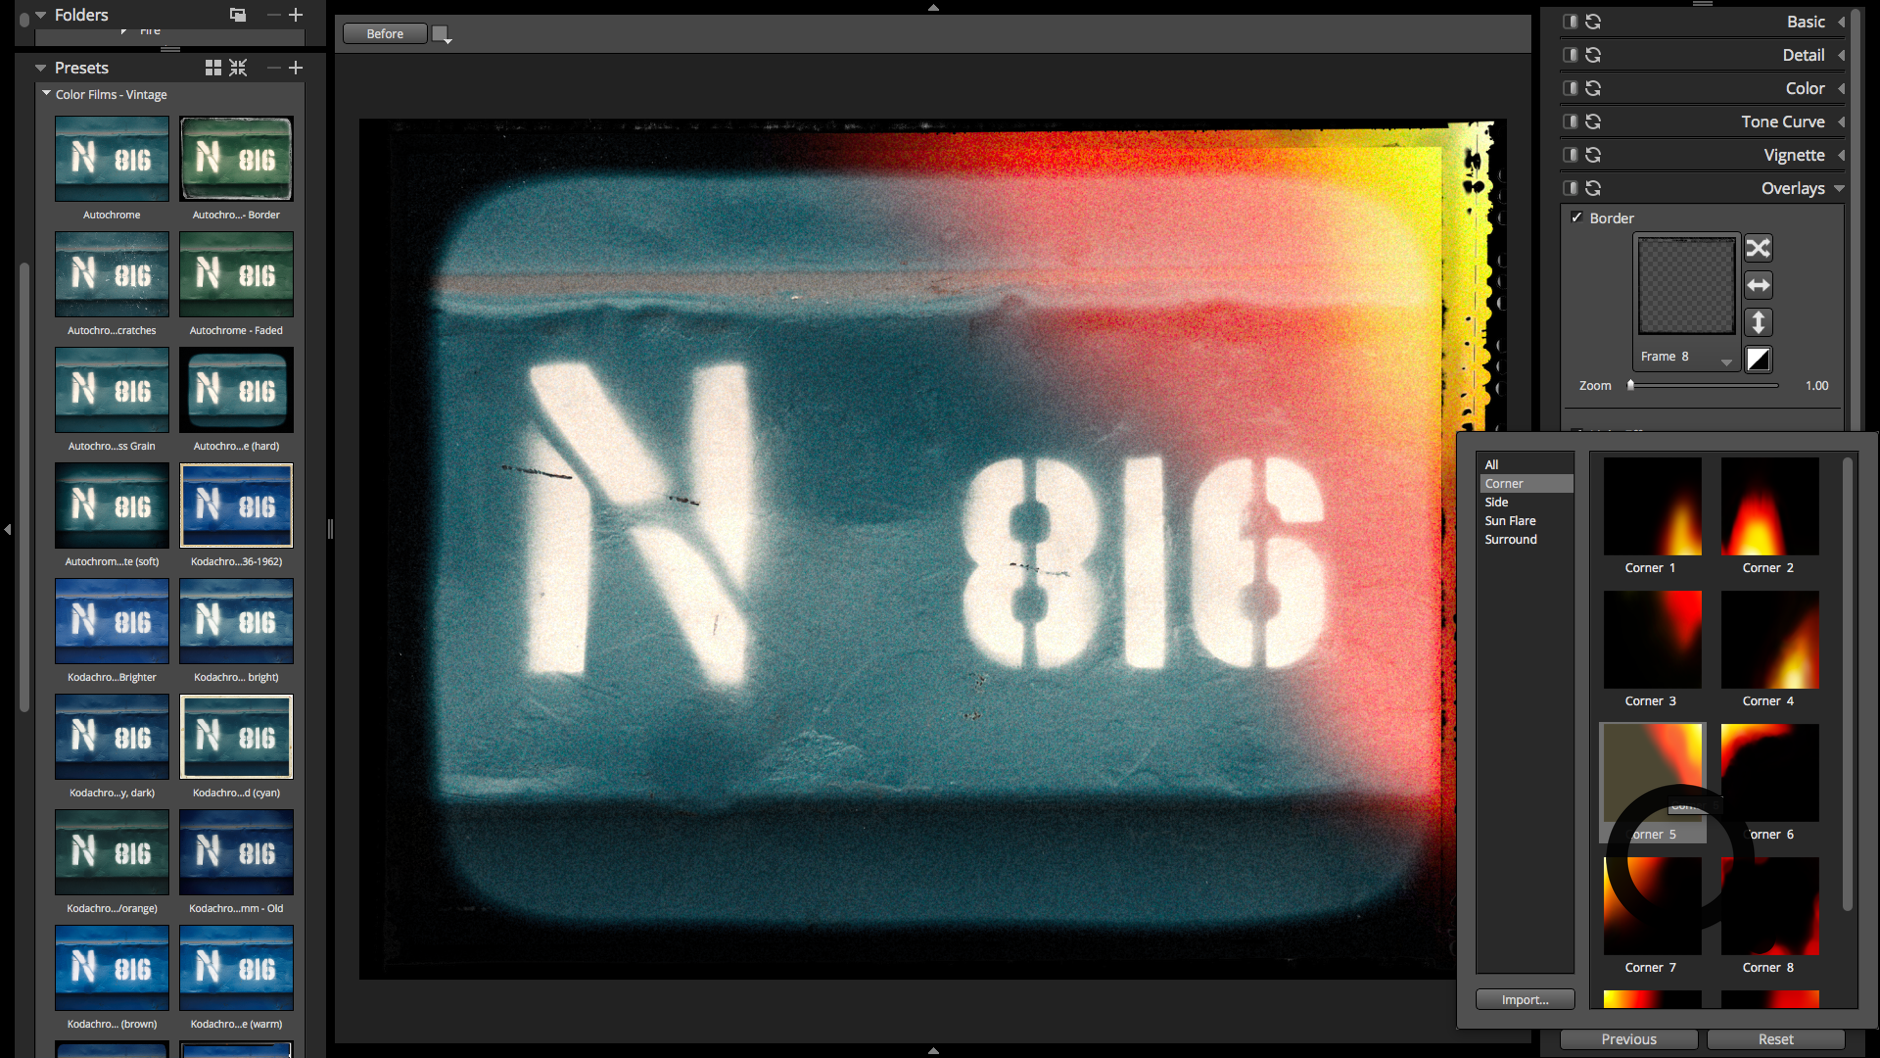 Screenshot of the Alien Skin Photo Bundle showing the results of a preset applied to a sign with letters and numbers